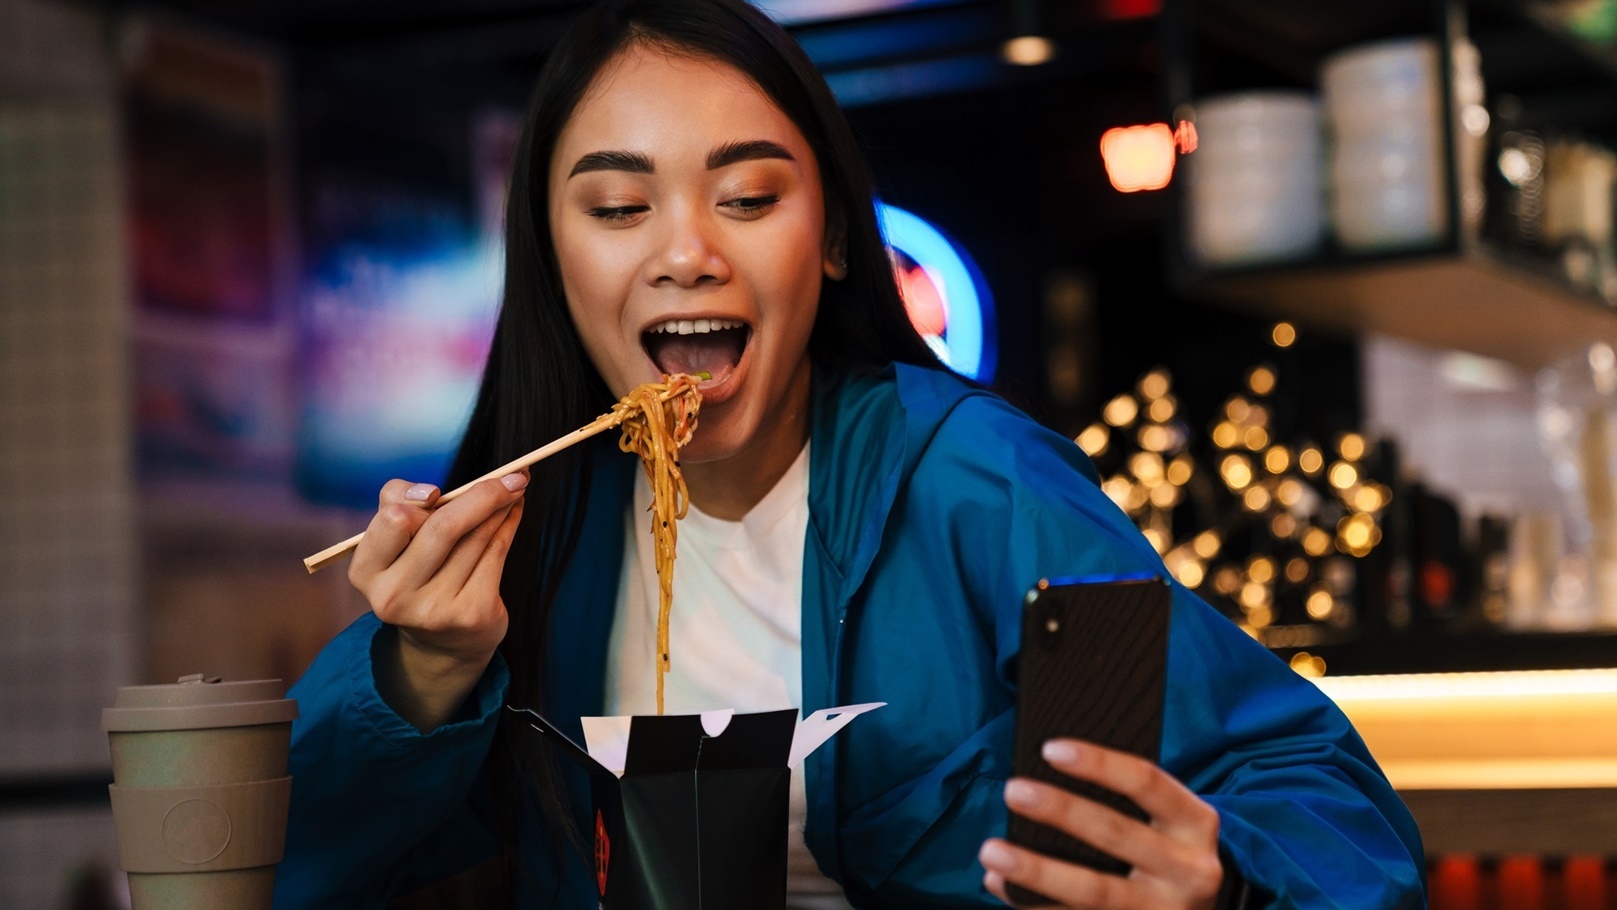 photo-of-asian-woman-eating-chinese-noodles-and-us-2021-08-28-03-02-40-utc